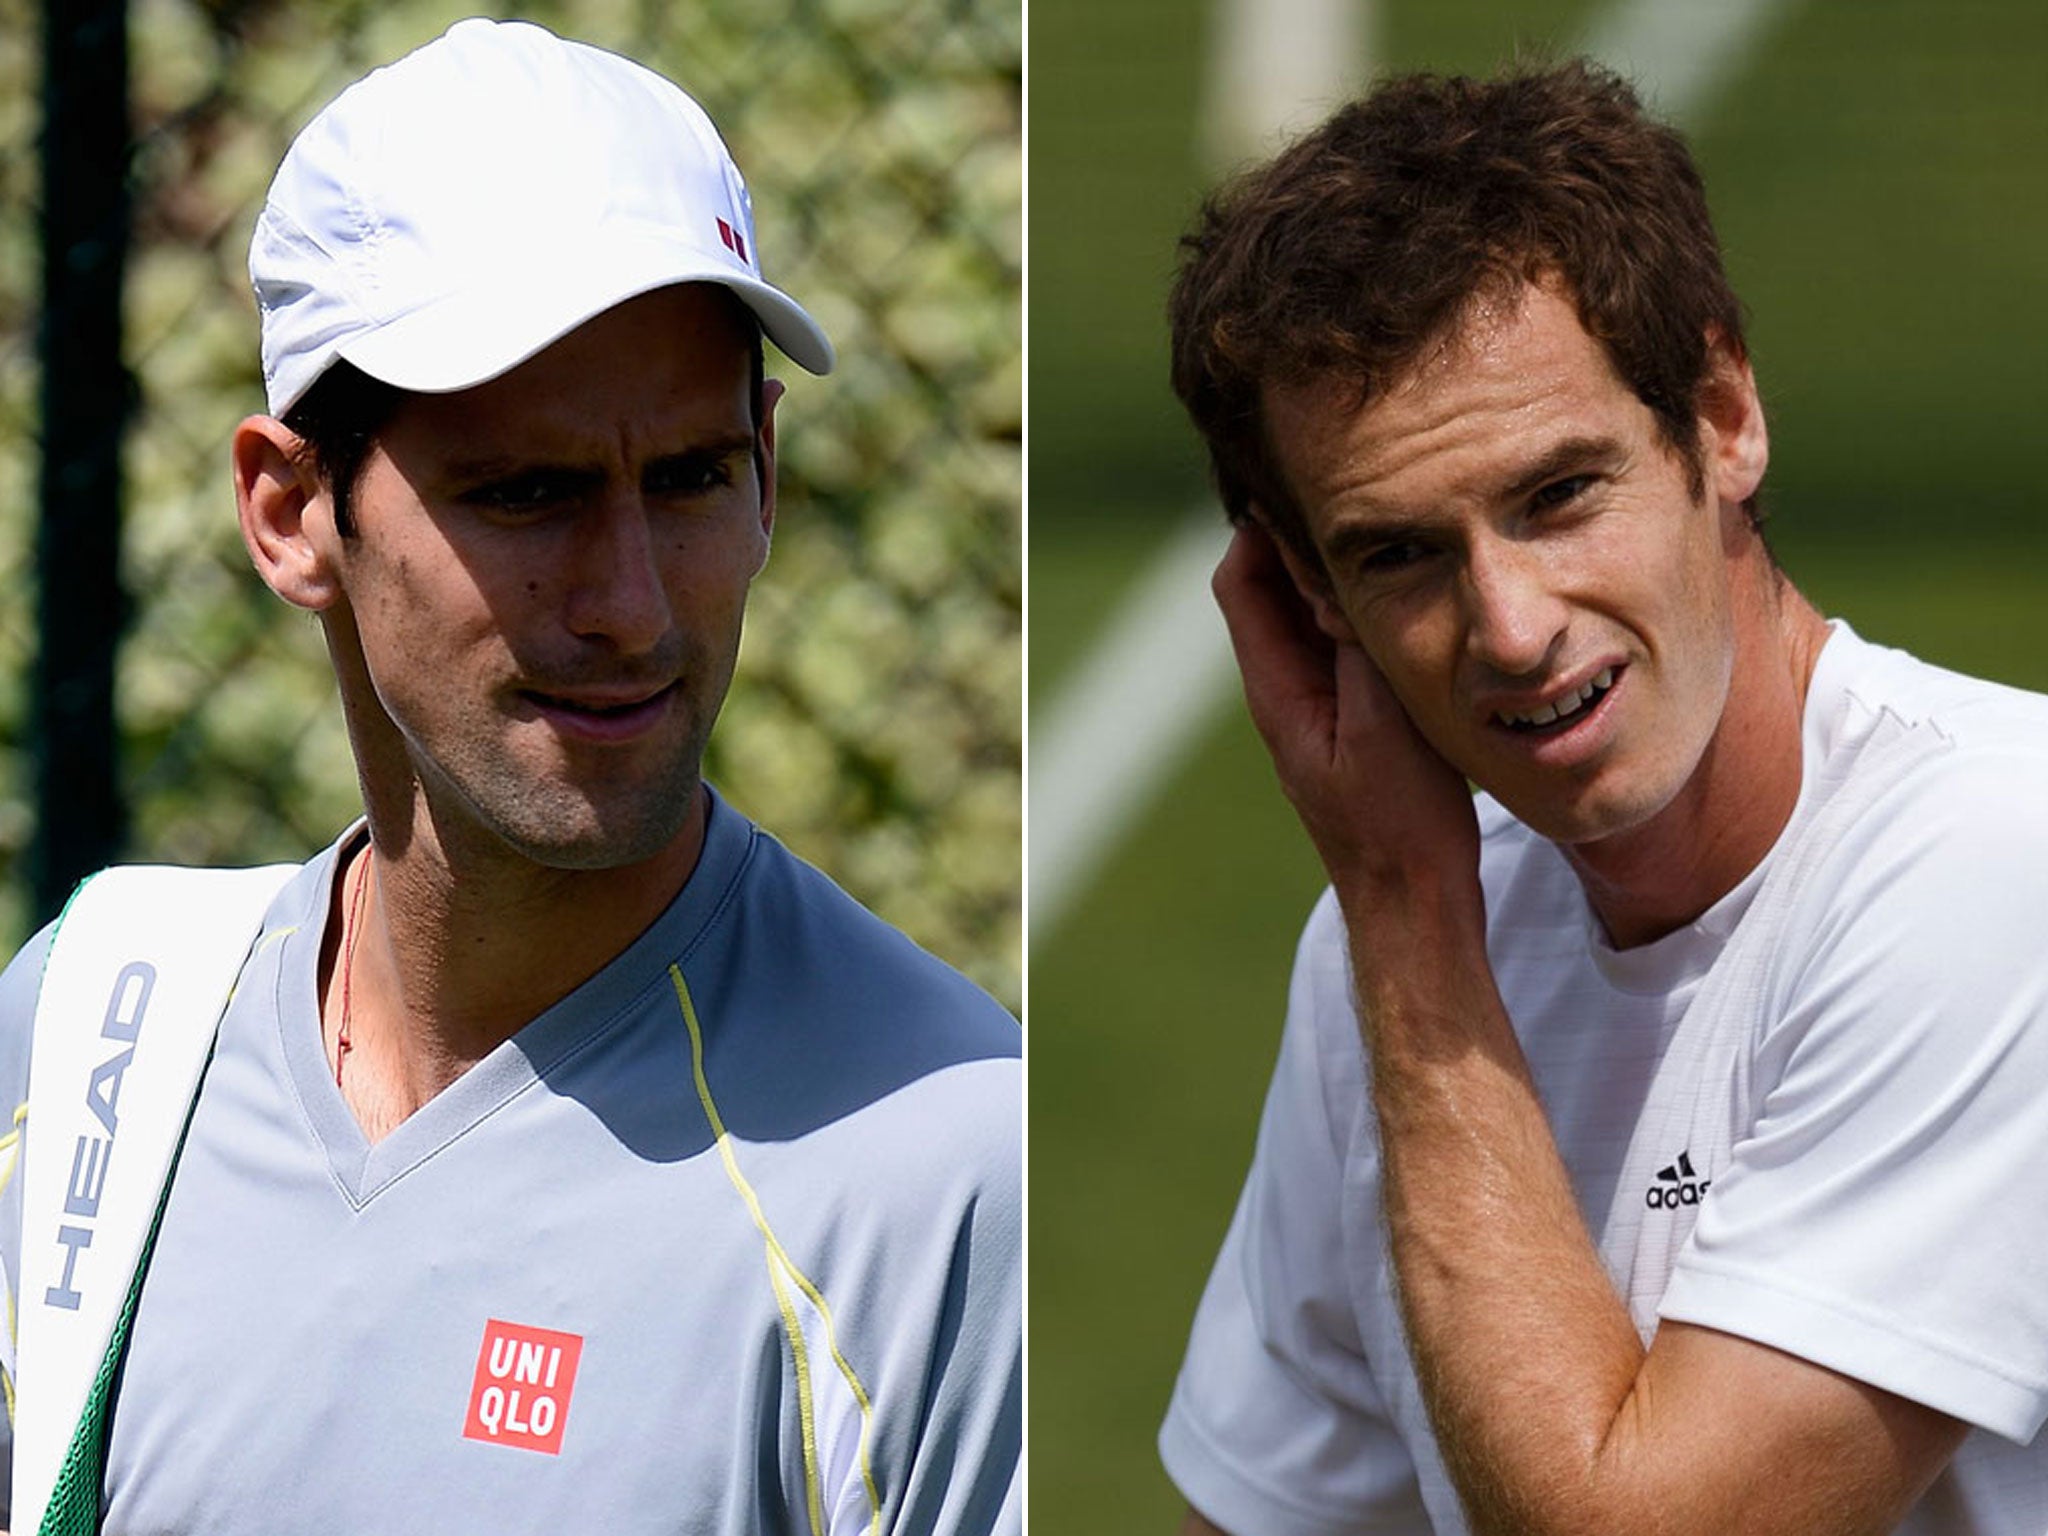 Novak Djokovic, left, and Andy Murray, right, are heading for another confrontation